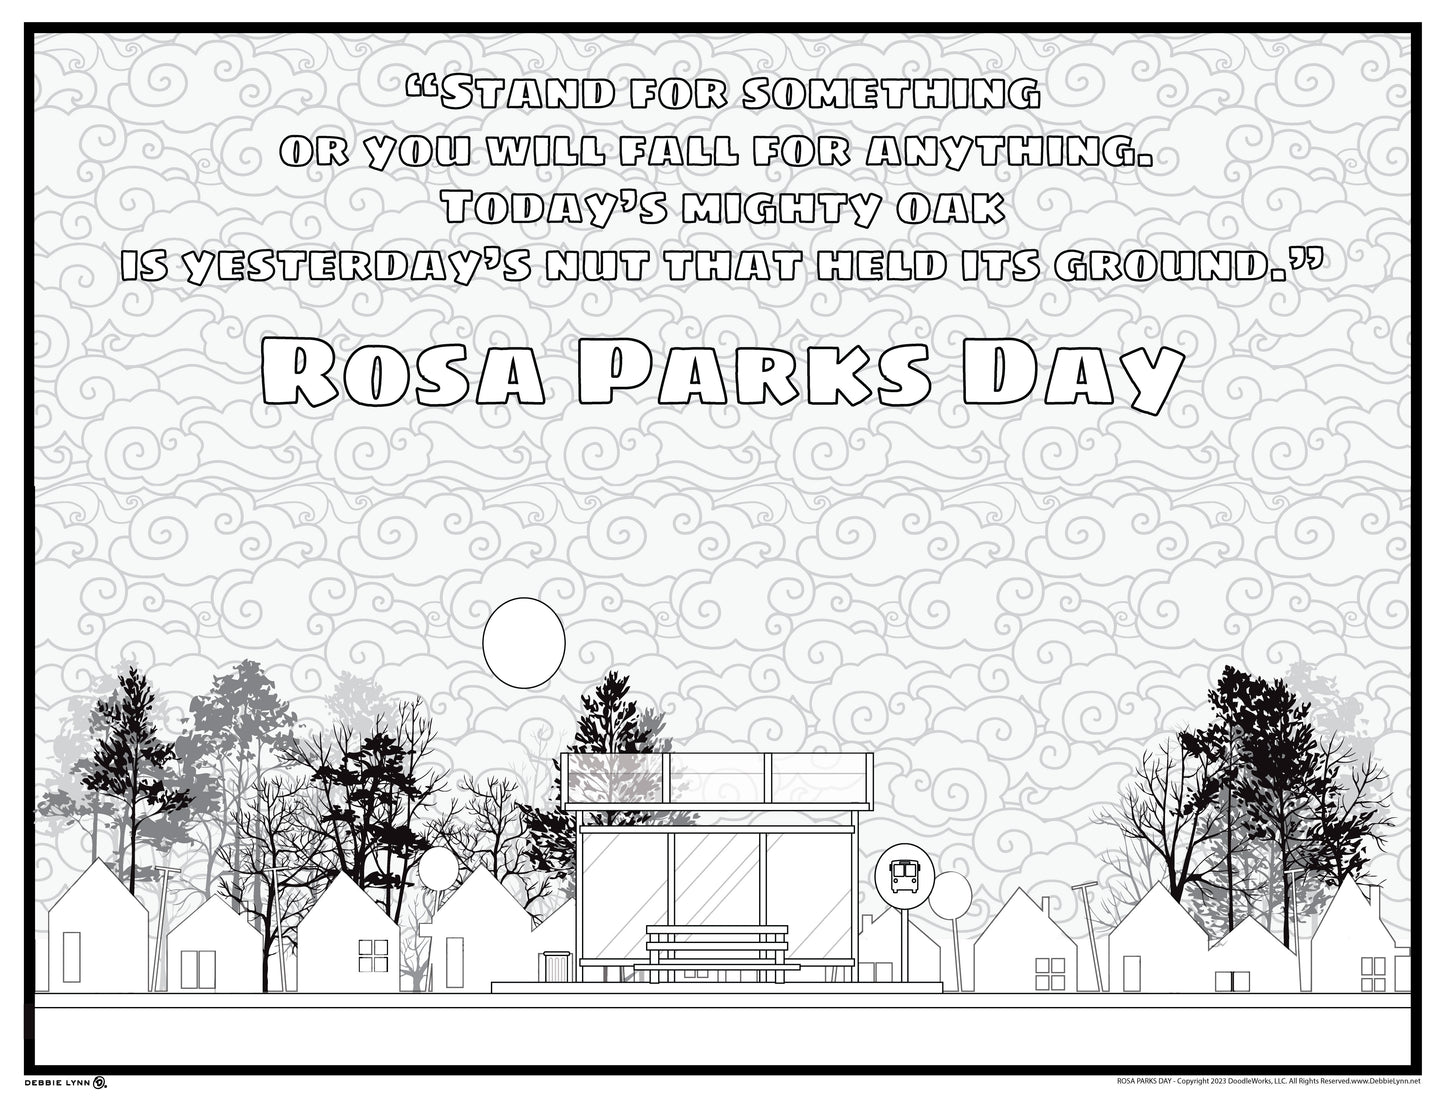 Rosa Parks Day Personalized Giant Coloring Poster 46"X 60"